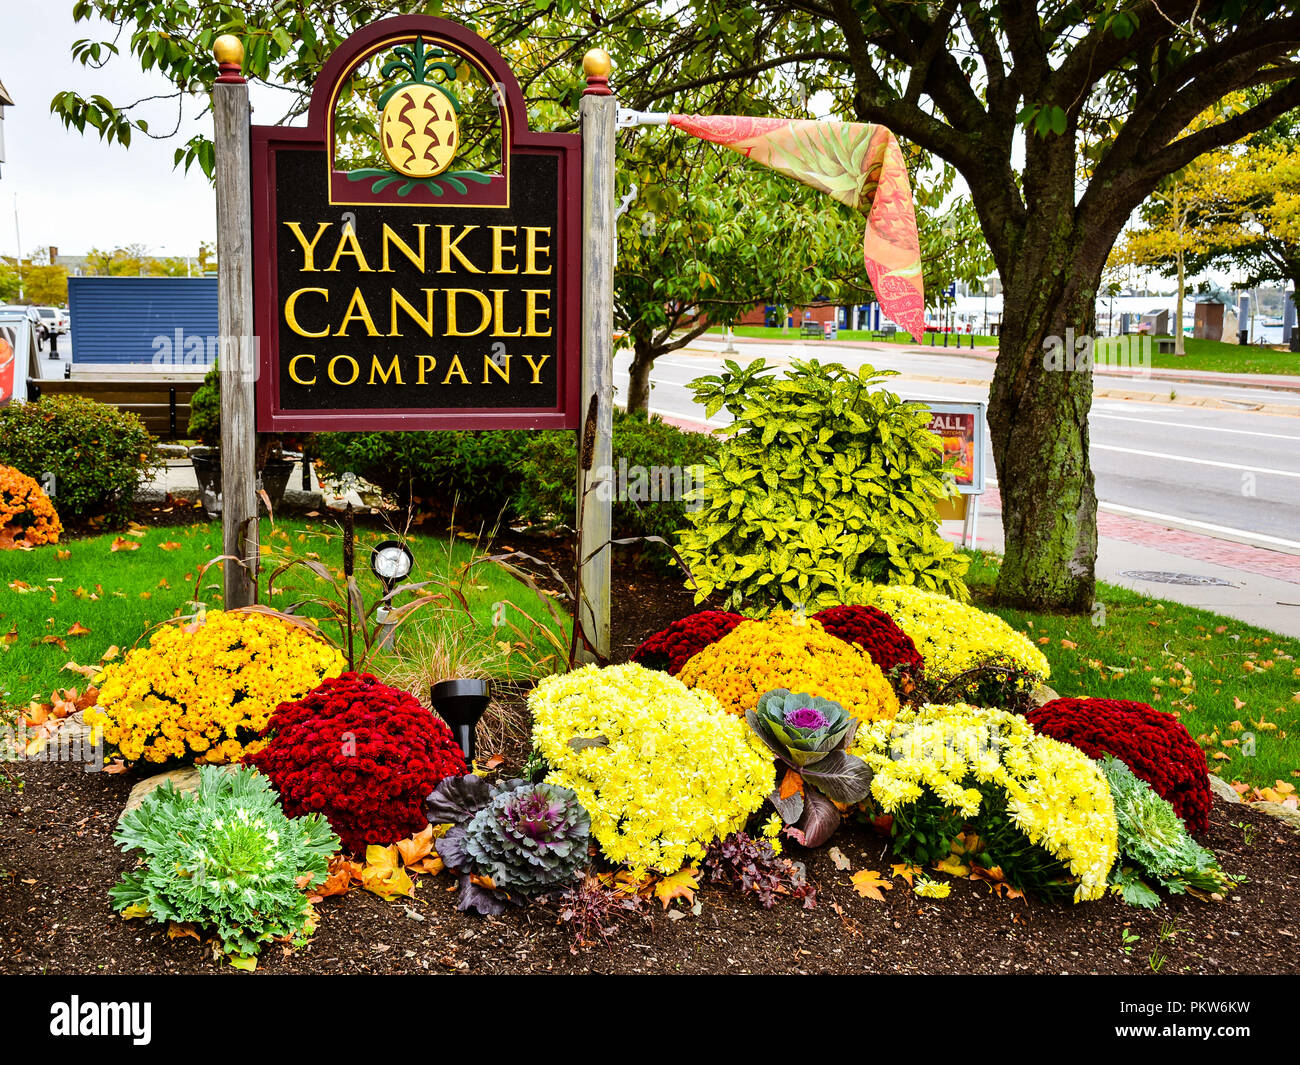 Yankee Candle Co. in Newport, RI. The Yankee Candle Company manufactures and sells scented candles, candleholders, accessories, and dinnerware. Stock Photo